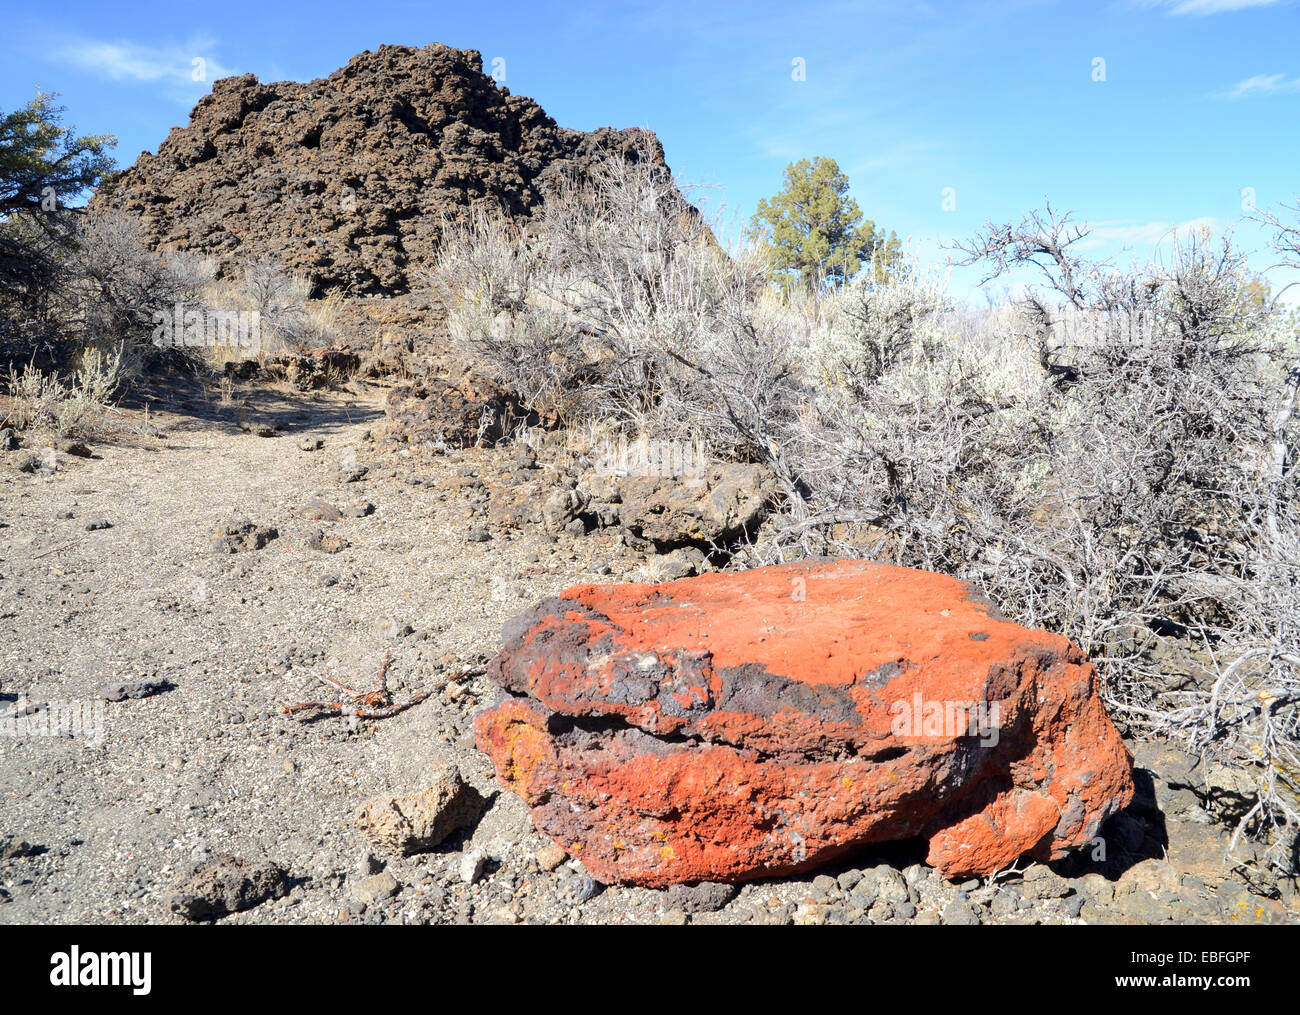 Lava Beds National Monument, California Stock Photo